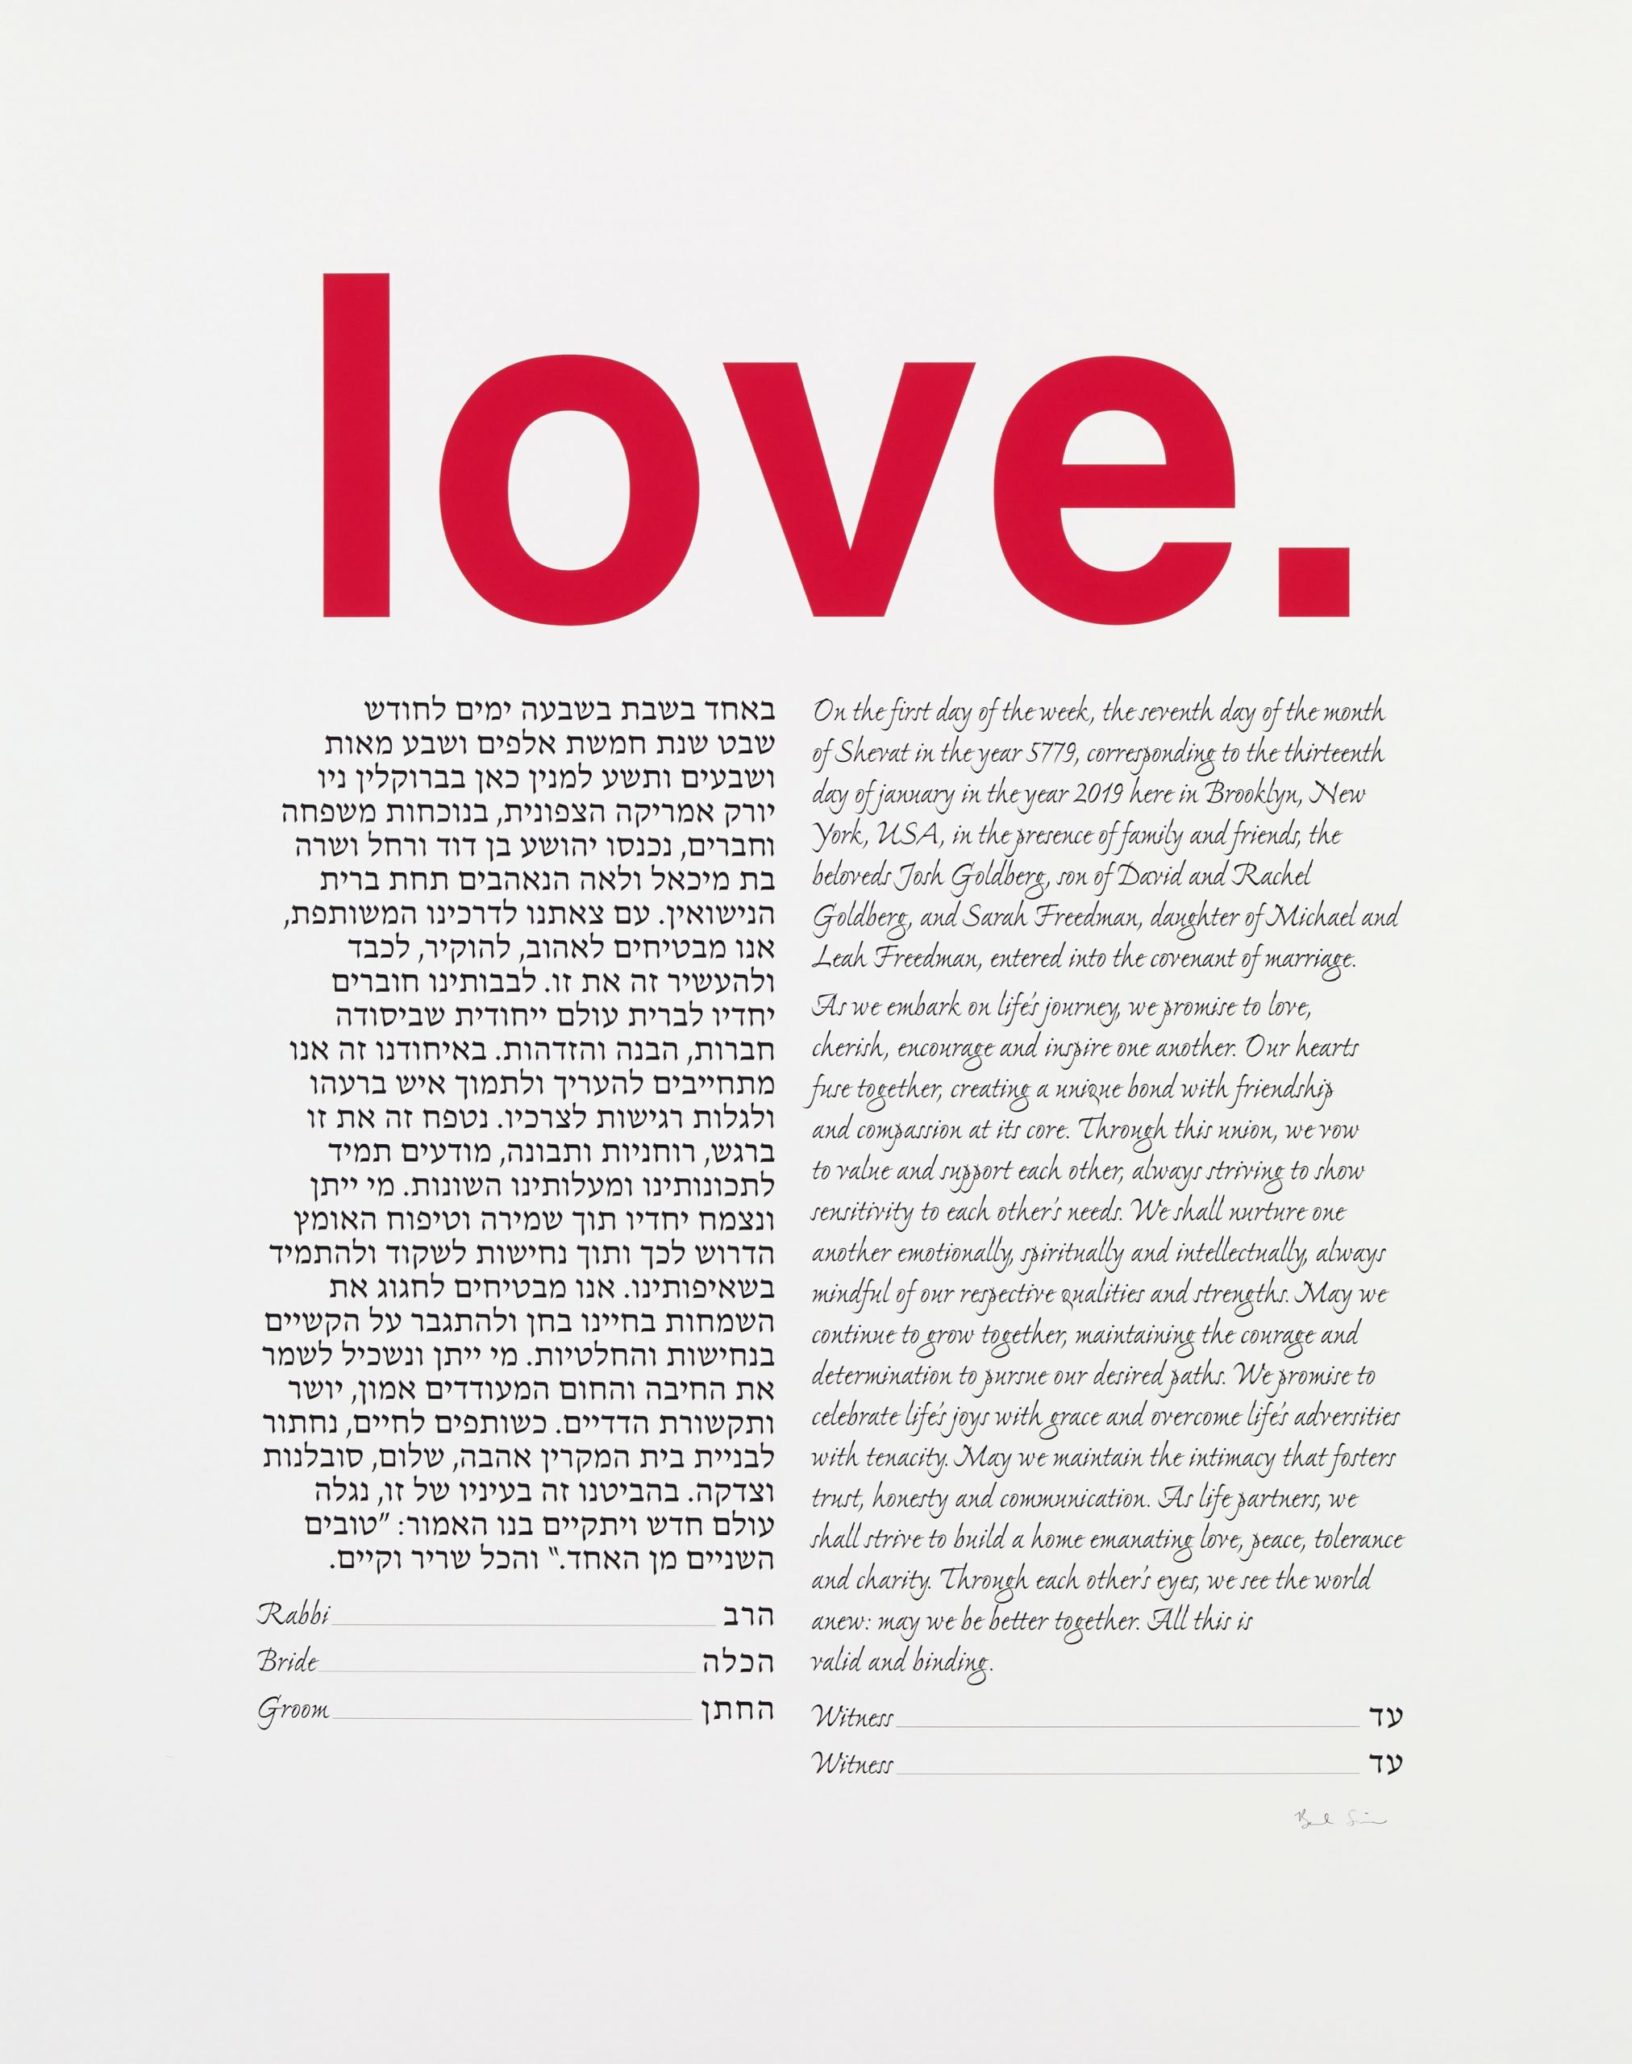 Love Period Ketubah Jewish Marriage Contracts by Baruch Sienna